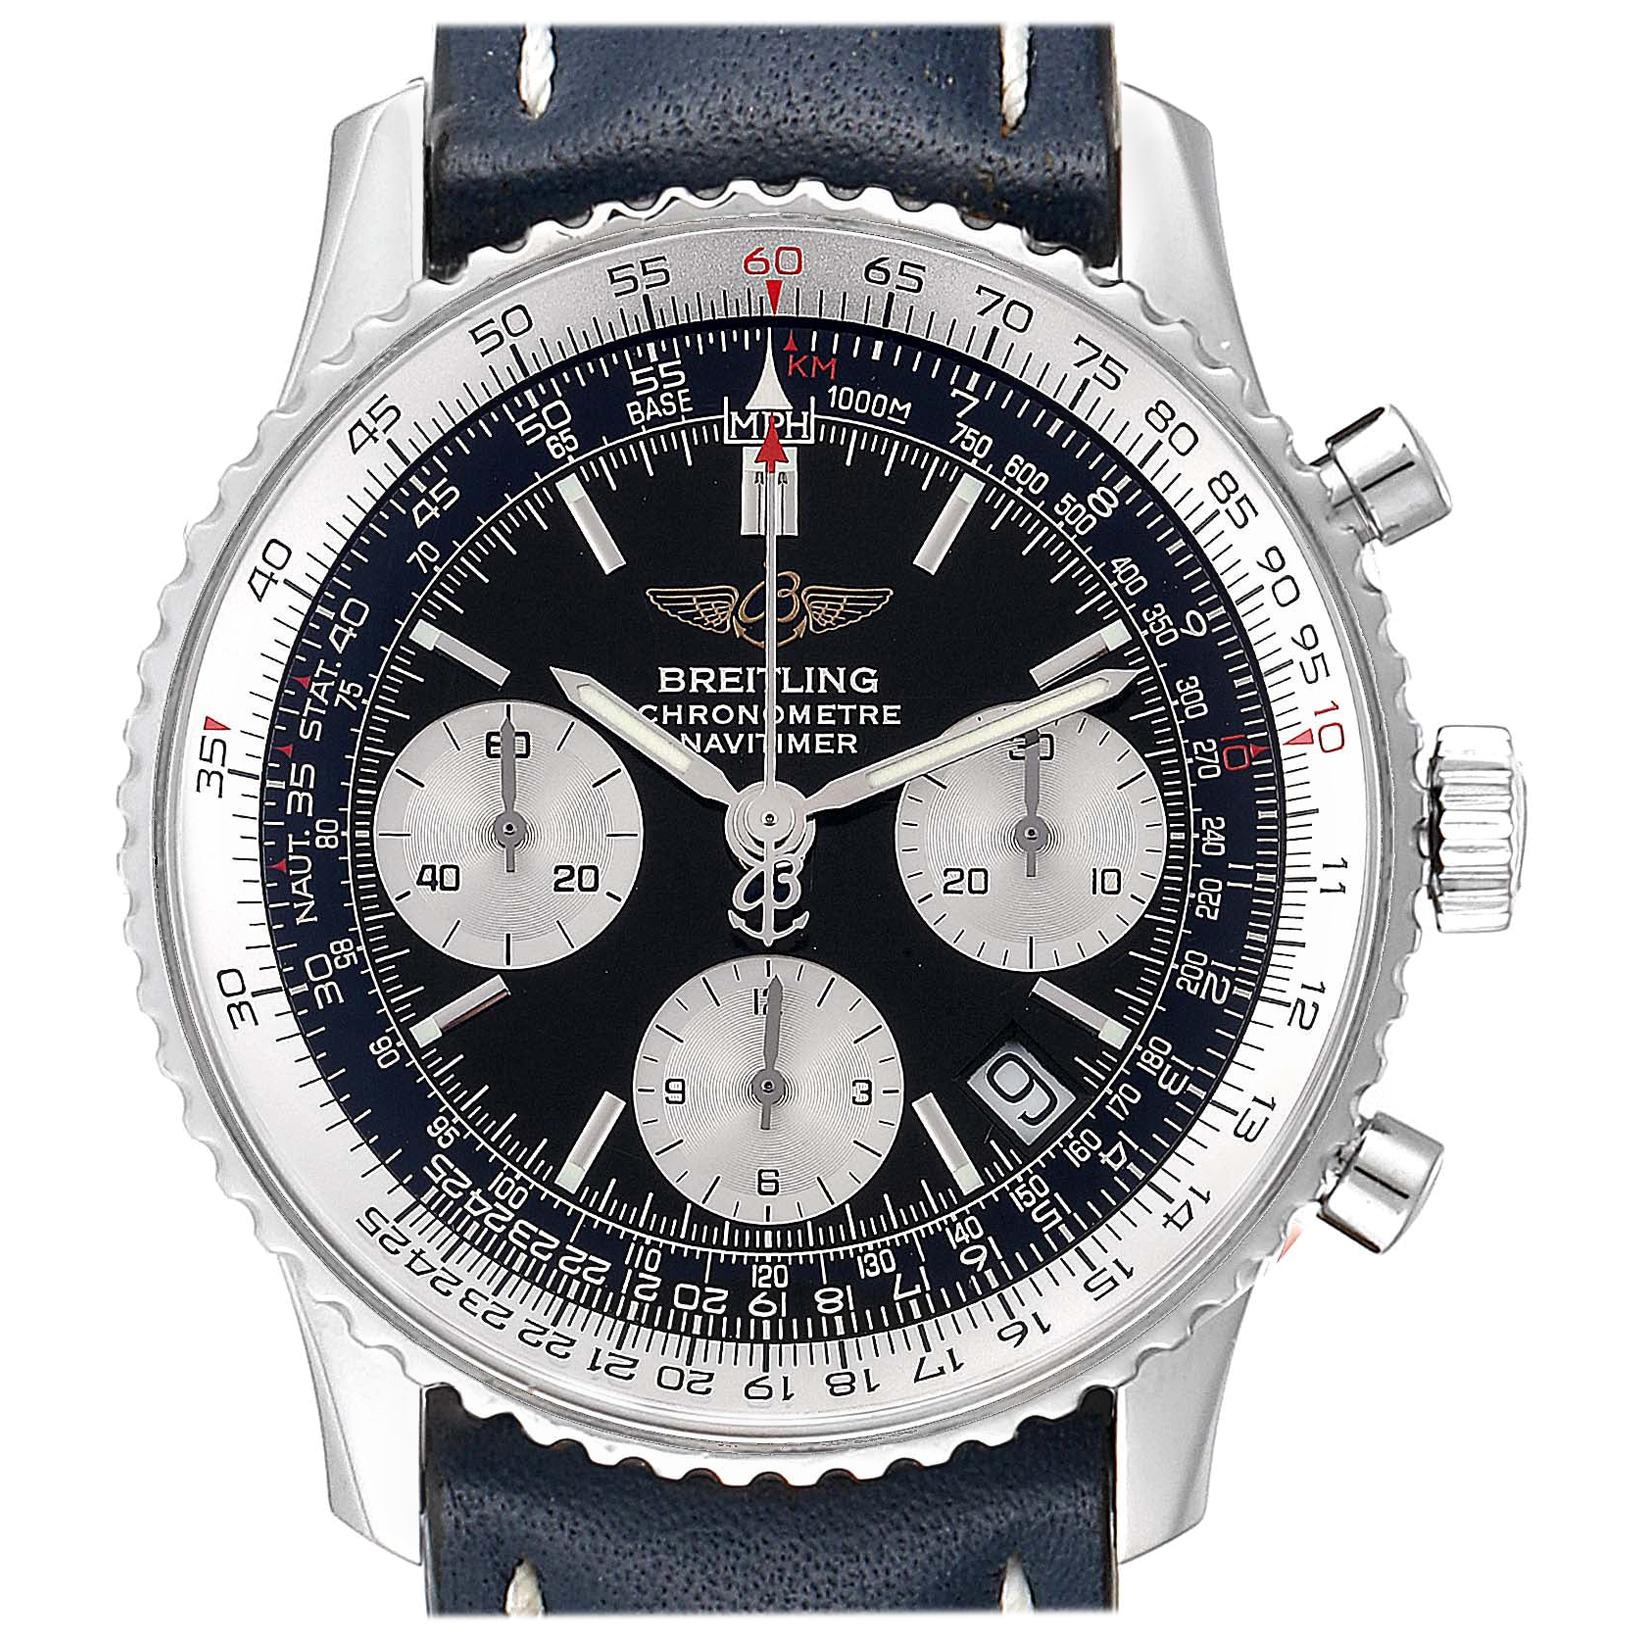 Breitling Navitimer Black Dial Chronograph Men's Watch A23322 Box Papers